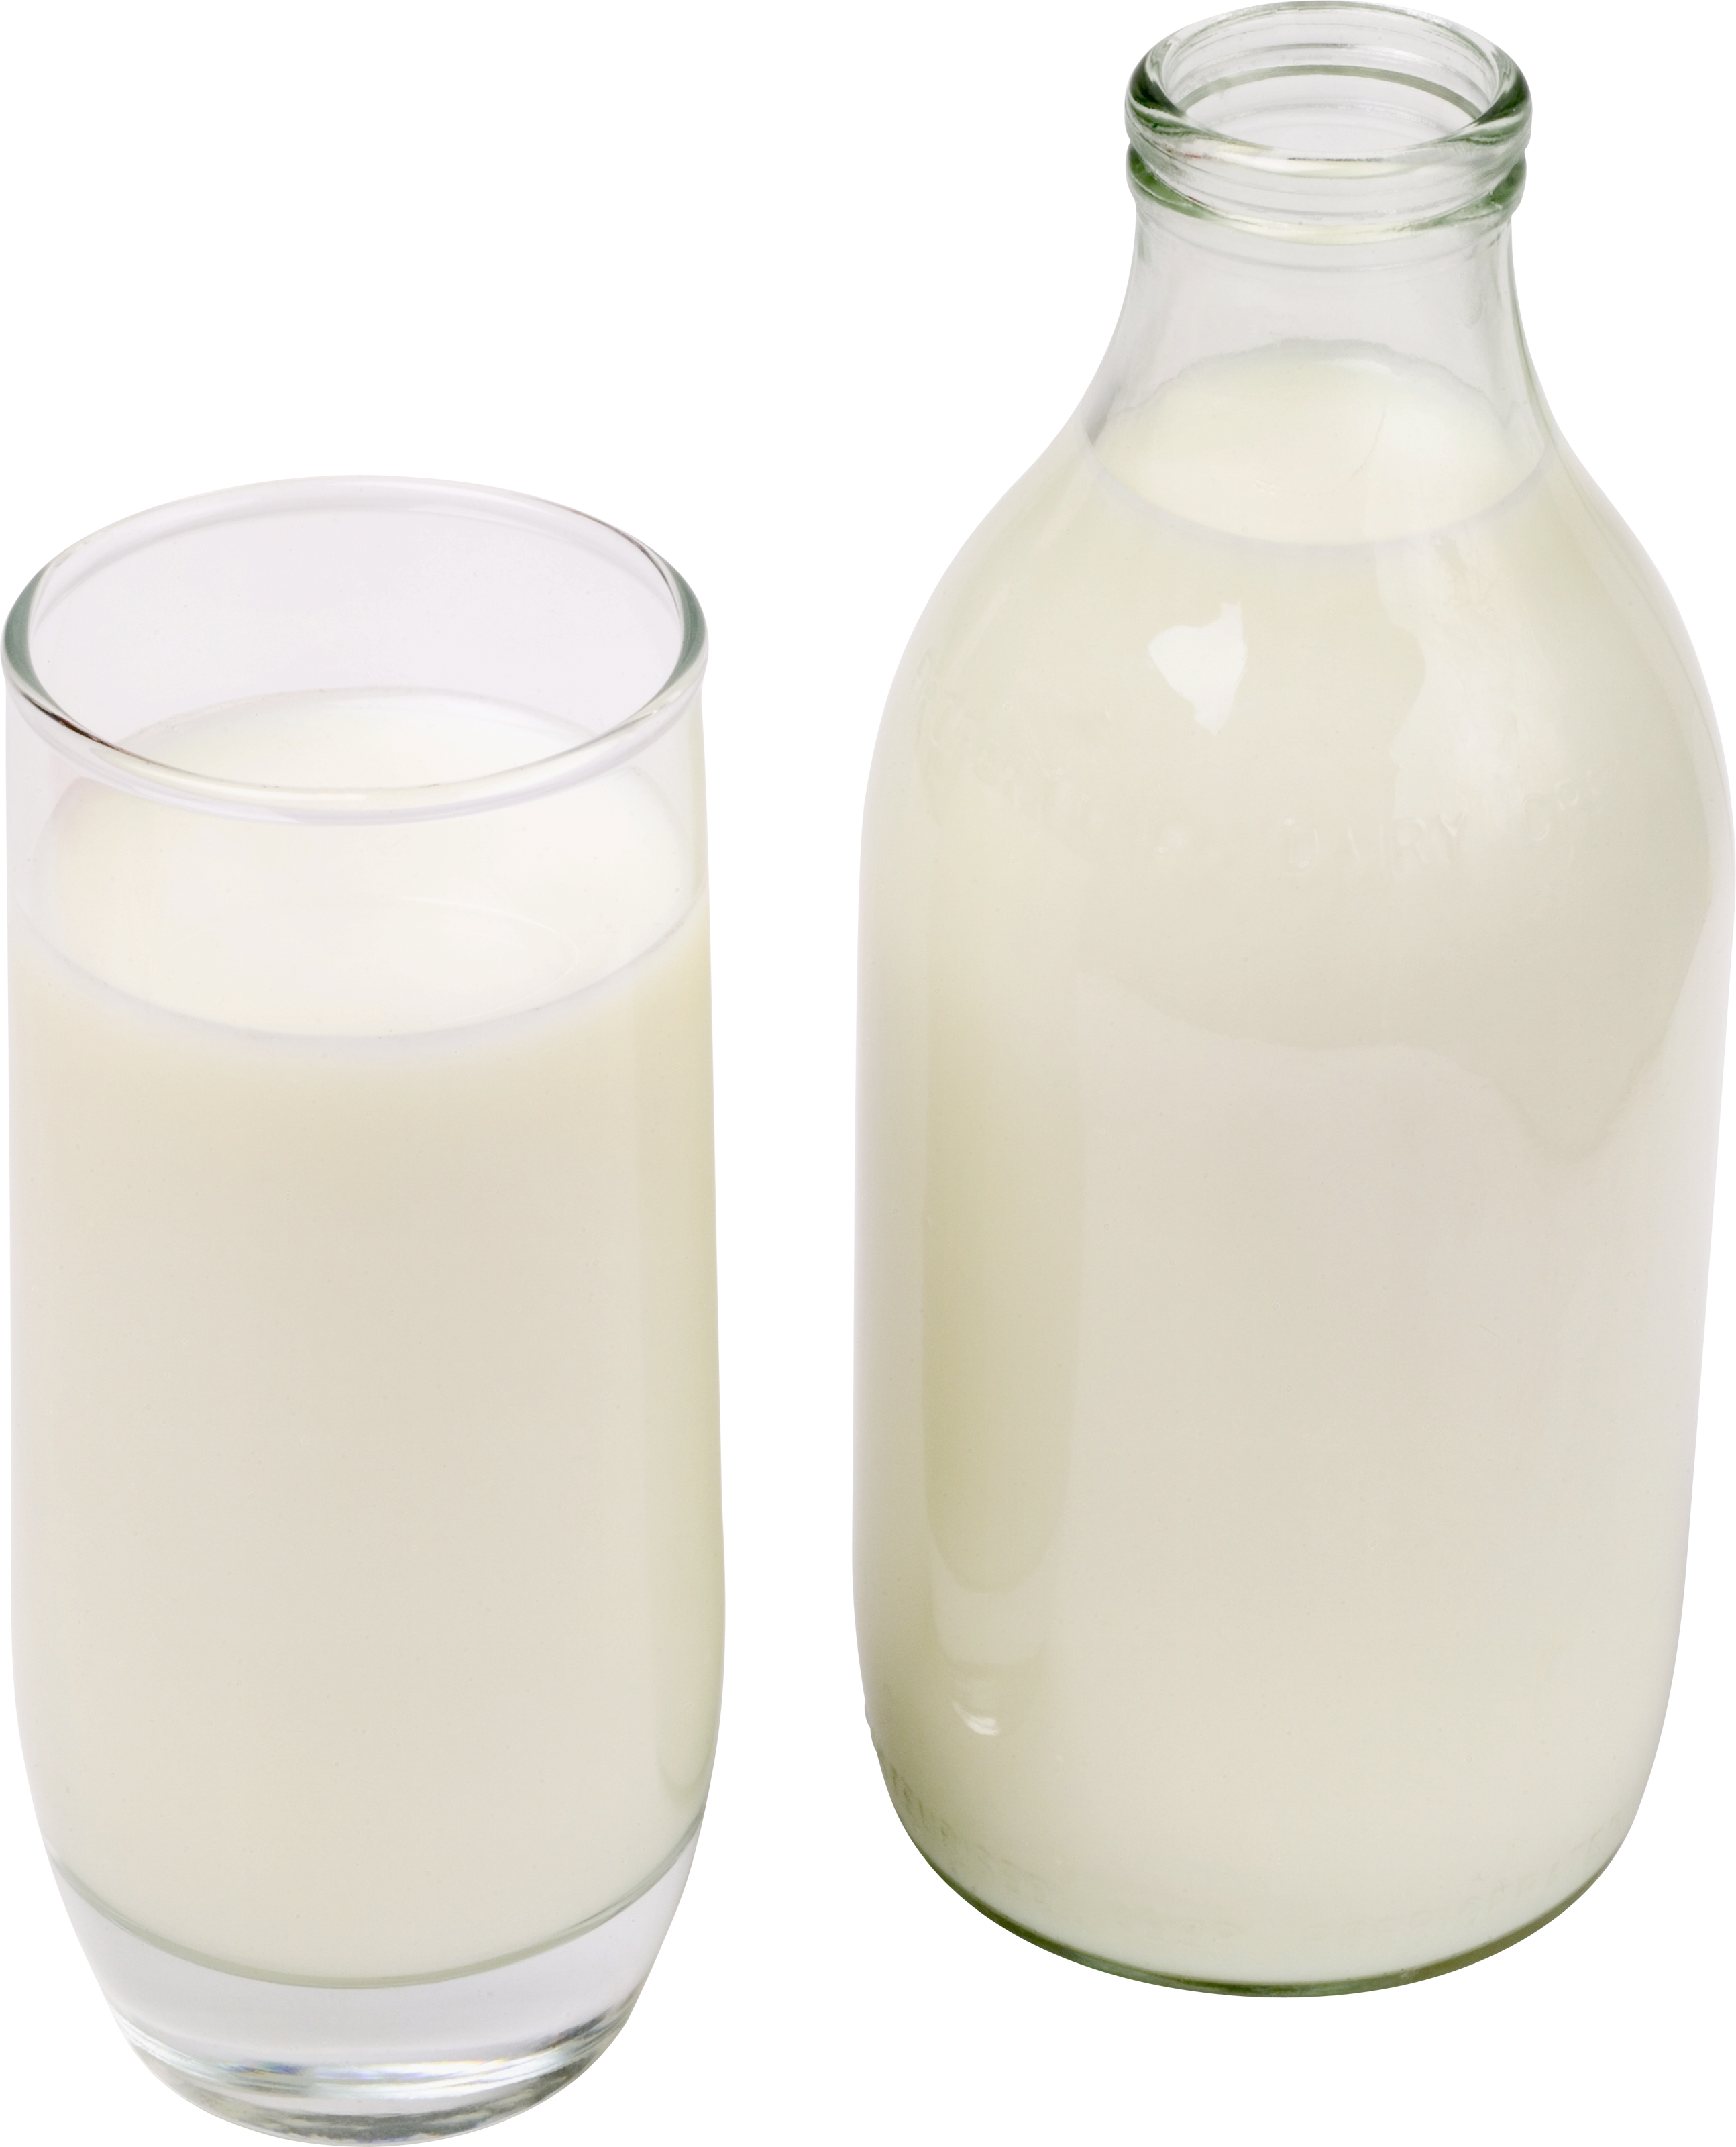 Milk bottle png. One isolated stock photo